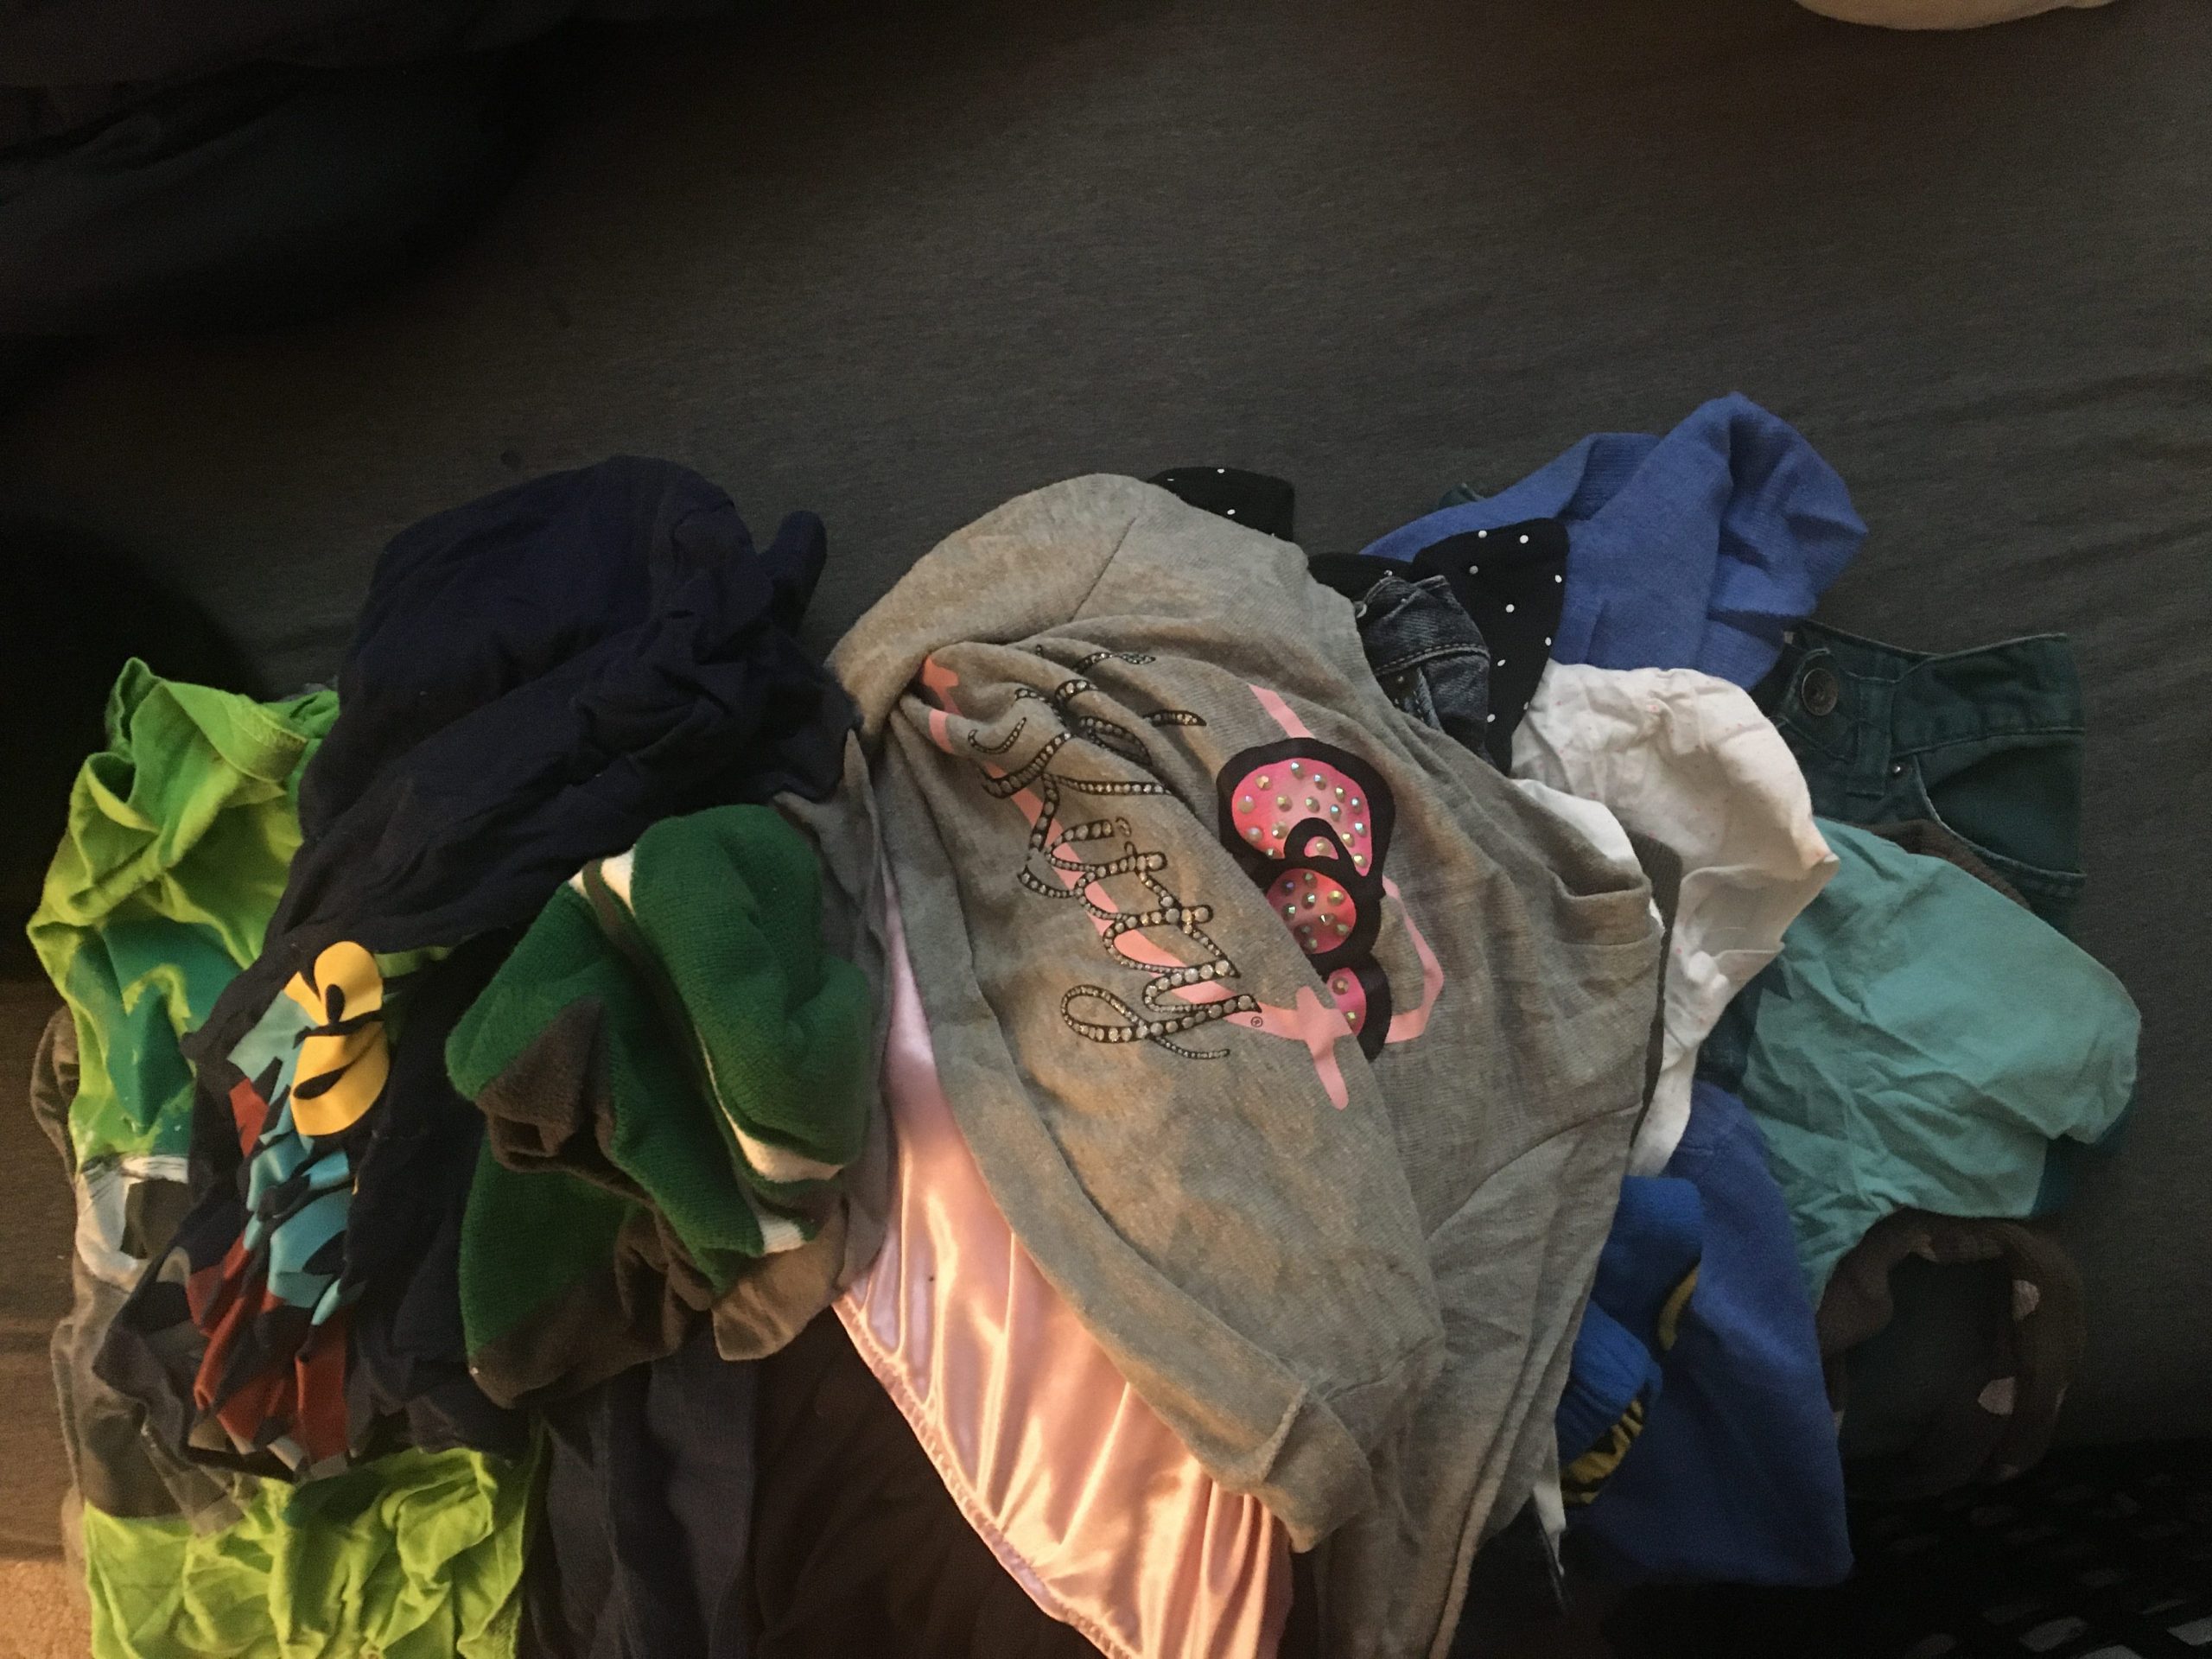 A pile of clothes on a bed